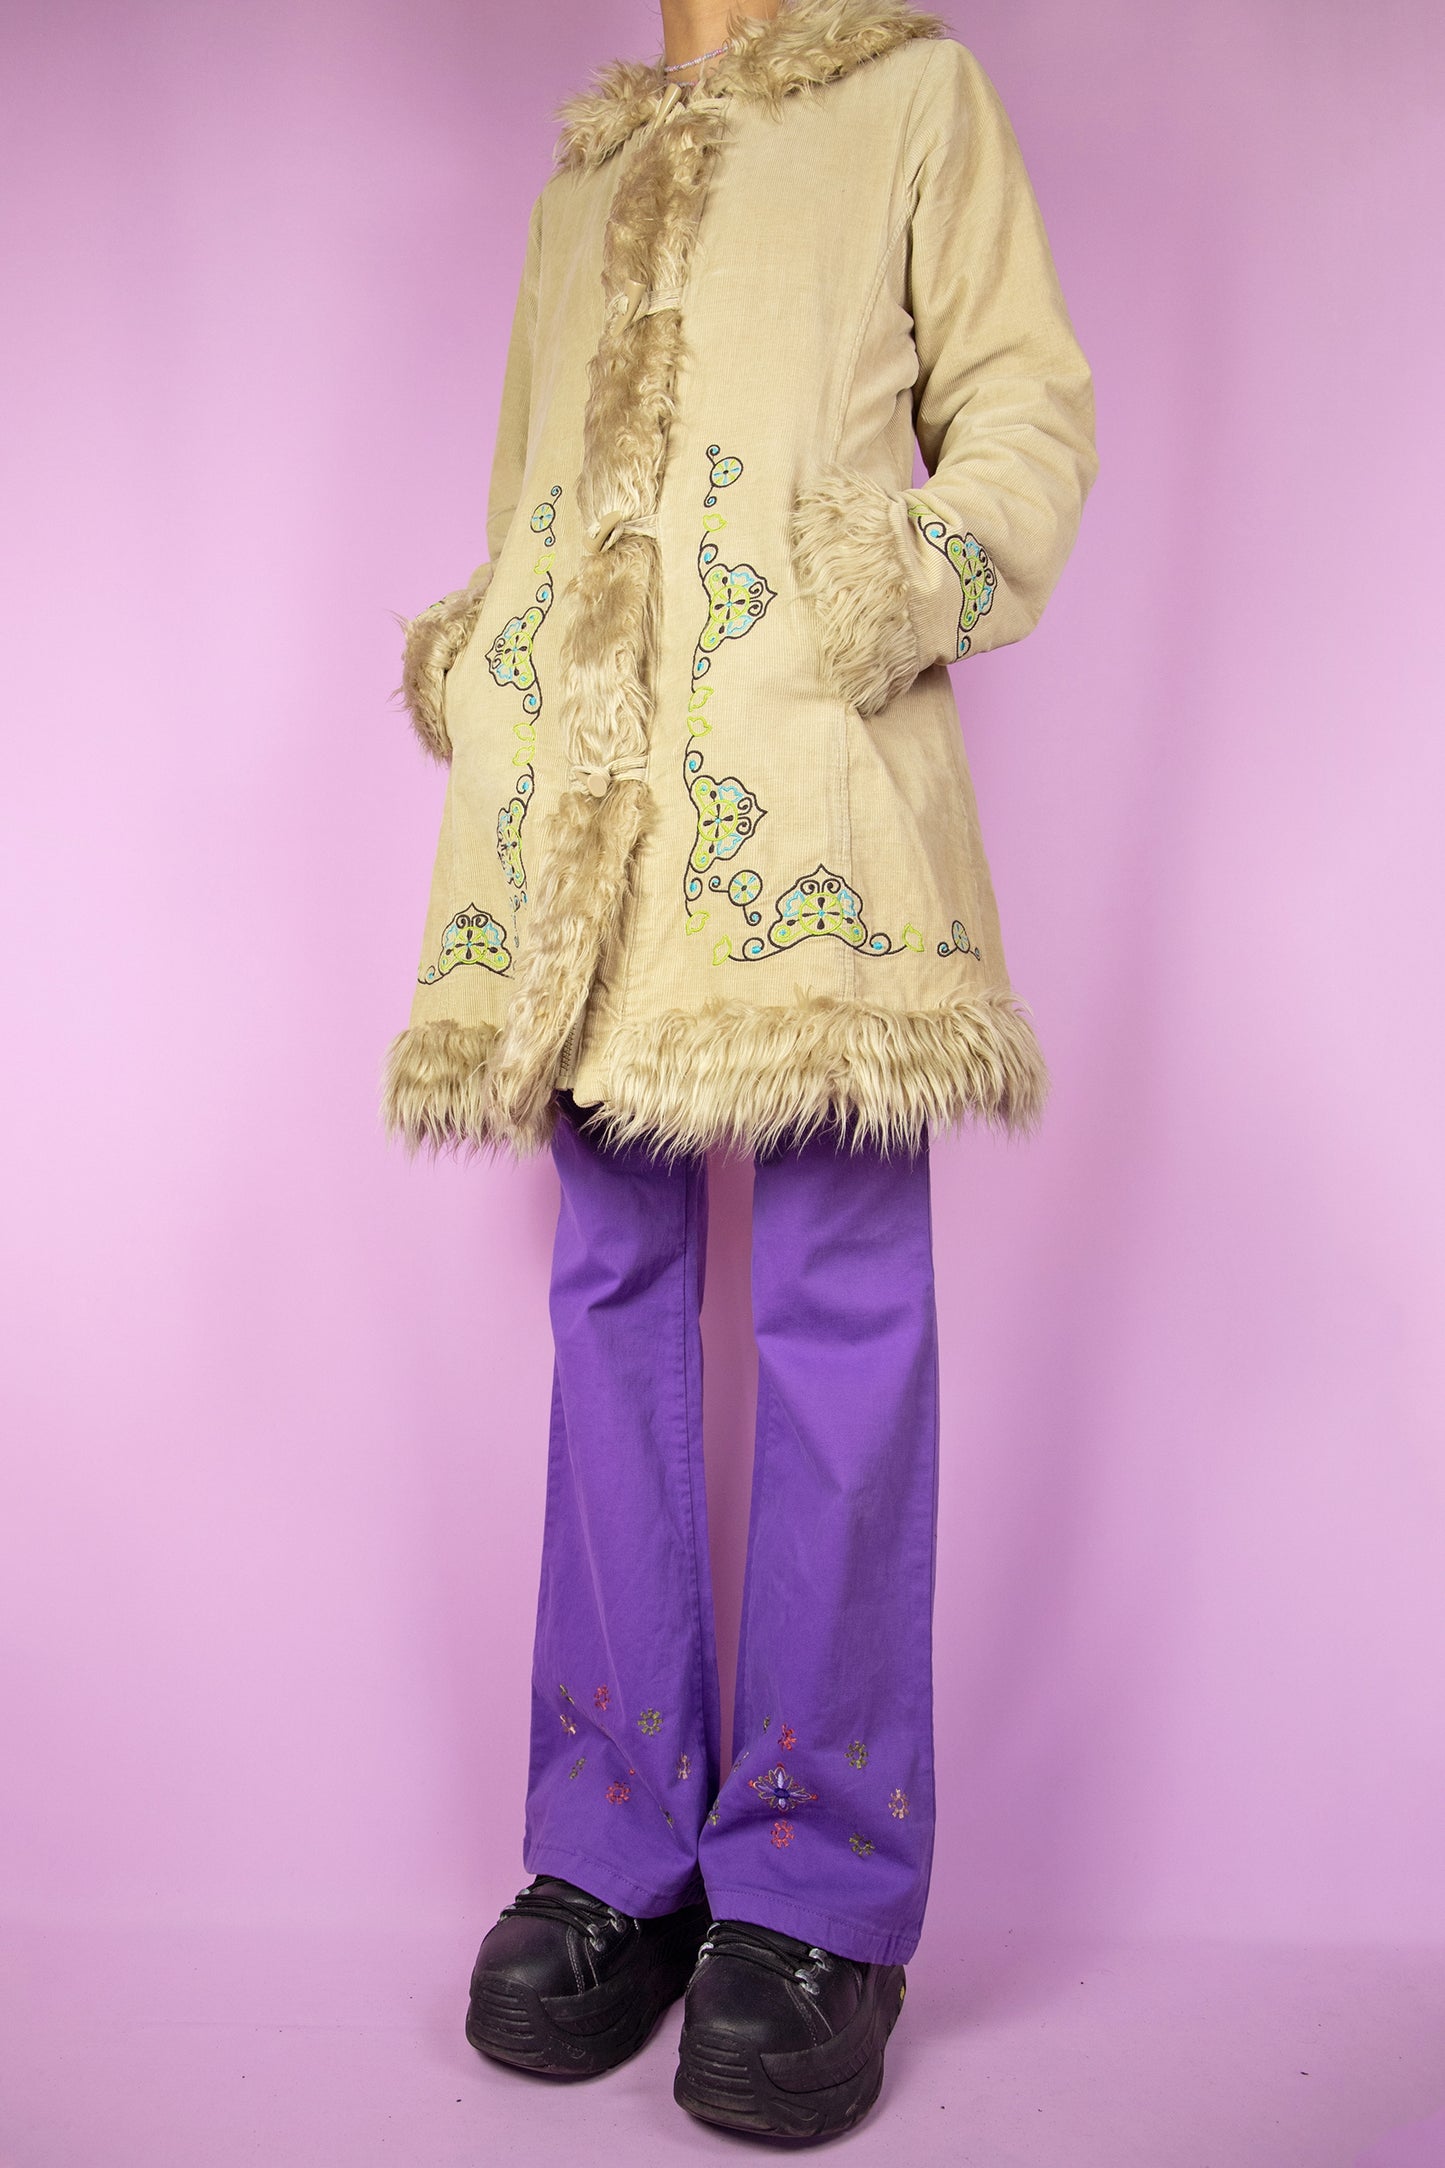 The Vintage Y2K Beige Afghan Inspired Coat is a light brown corduroy coat featuring a faux fur collar and cuffs, zip and button closure, pockets, and embroidered details. This iconic penny lane style winter coat from the 2000s serves as a boho fairy grunge statement jacket.